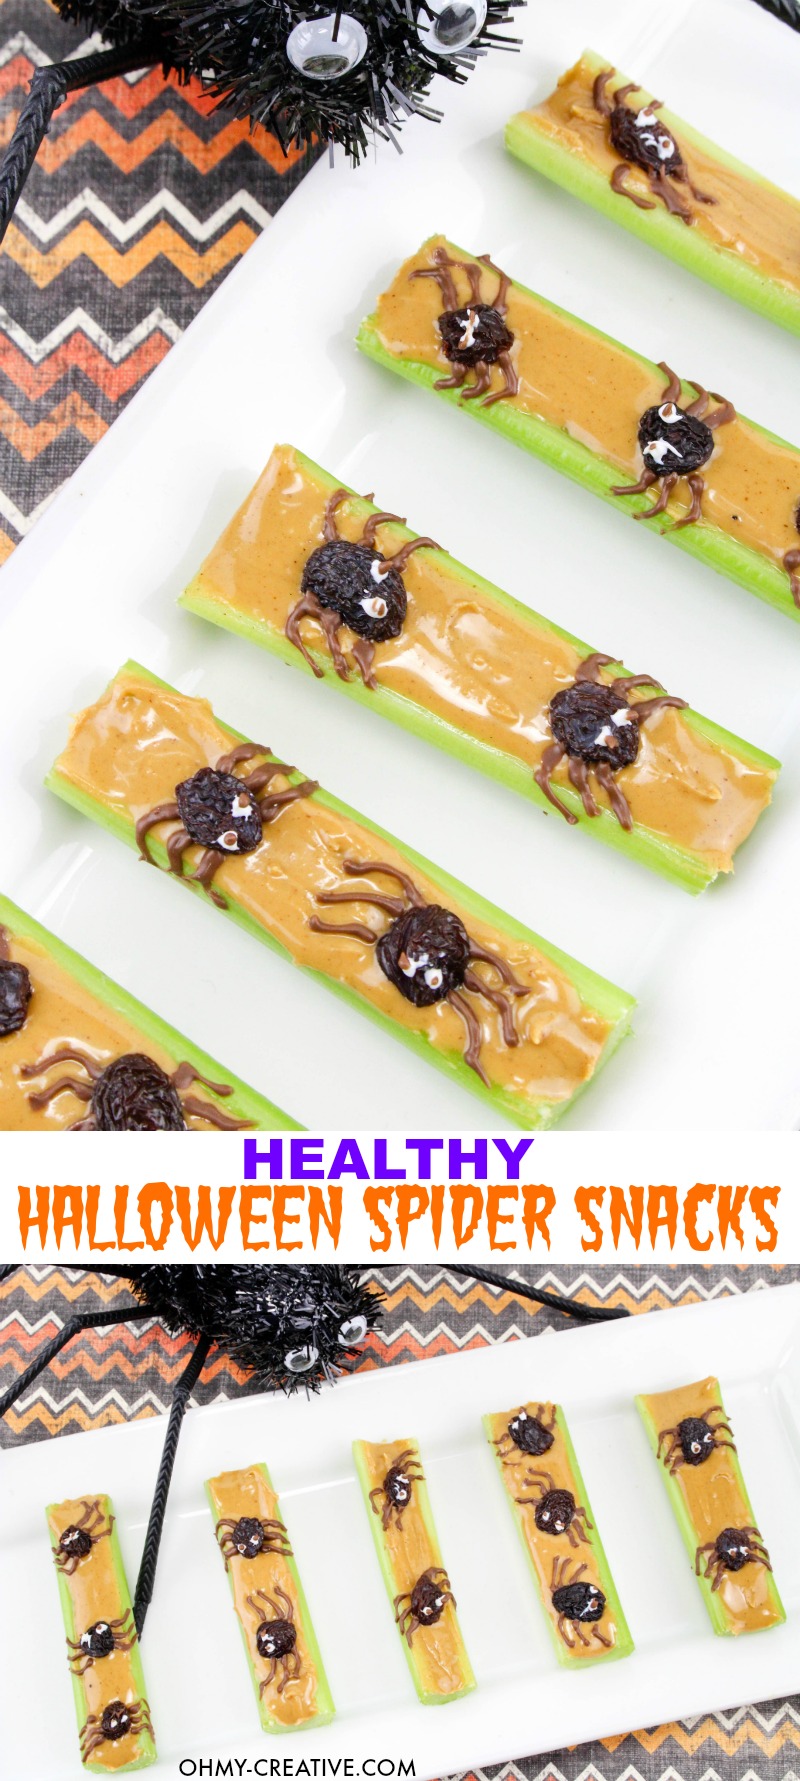 These Cool Spider Healthy Halloween Snacks make a great option over sweets for all Halloween activities. Make ahead of time for parties or to serve as an after school snack...great for playdates too. OHMY-CREATIVE.COM | #healthyhallweensnacks #halloweensnacks #halloweenpartyfood #halloweenpartysnack #healthyhalloweenappetizer #halloweenspider 